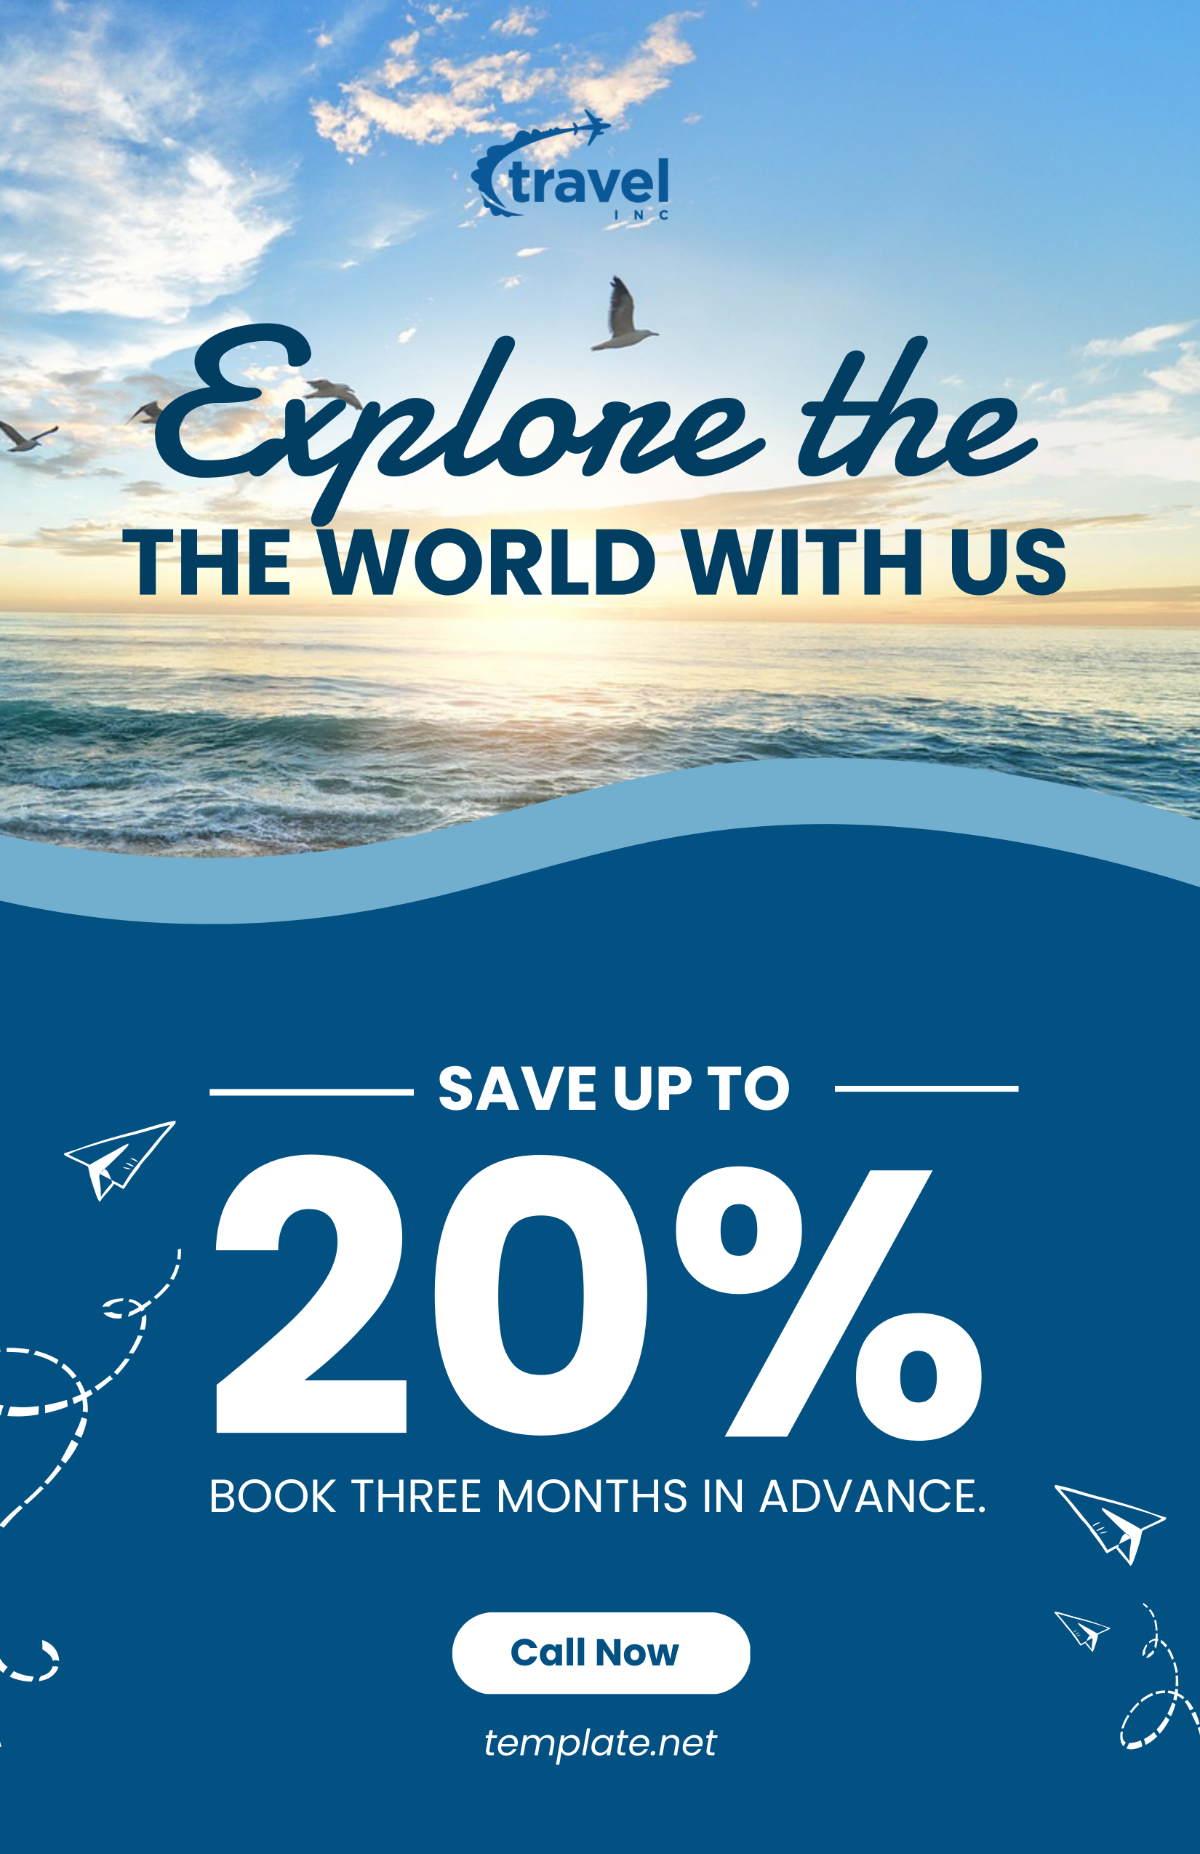 Travel Agency Advertisement Poster Template